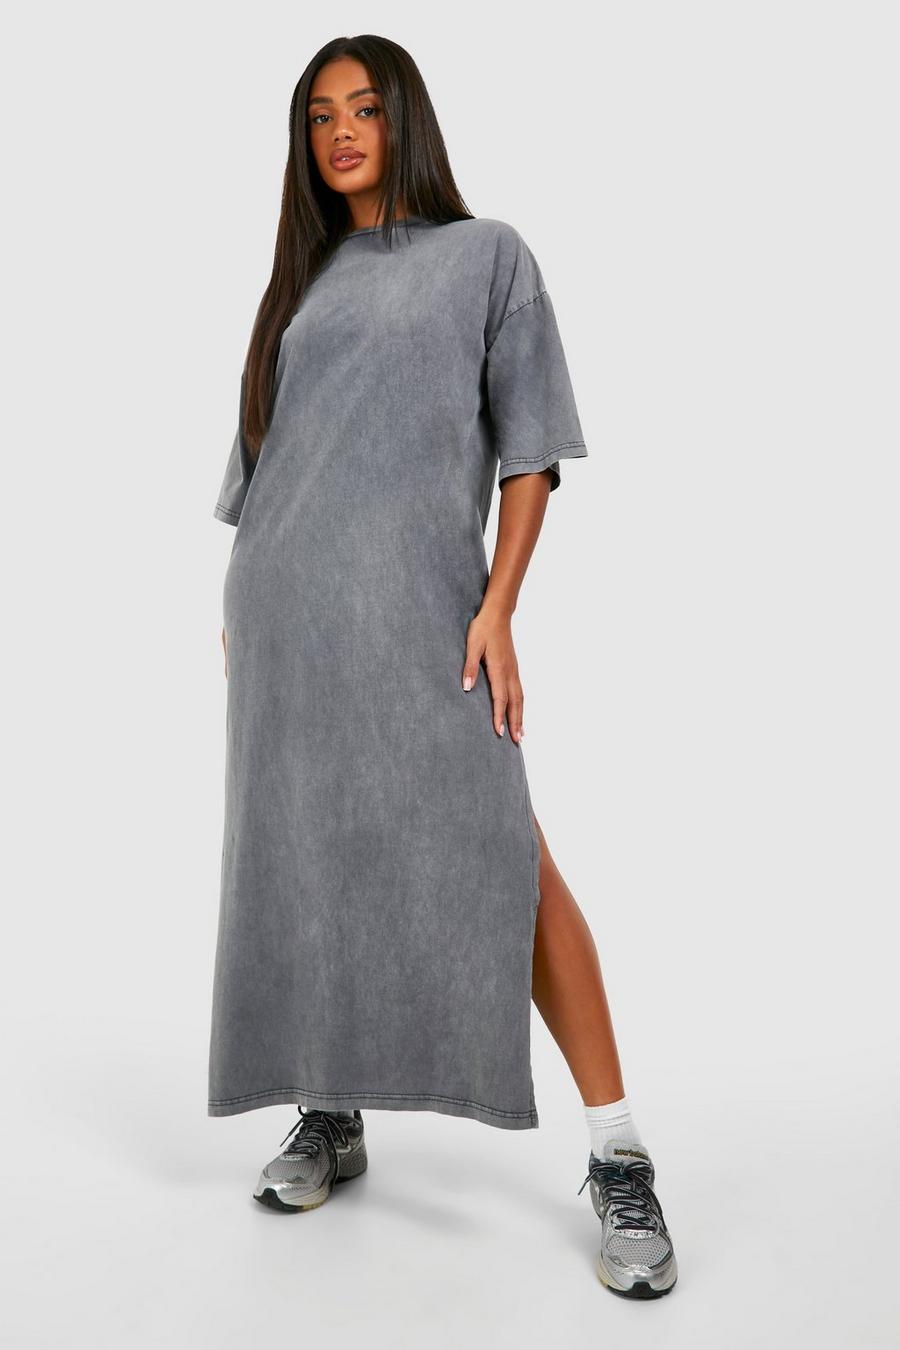 t shirt dress with leggings for Sale,Up To OFF-52%